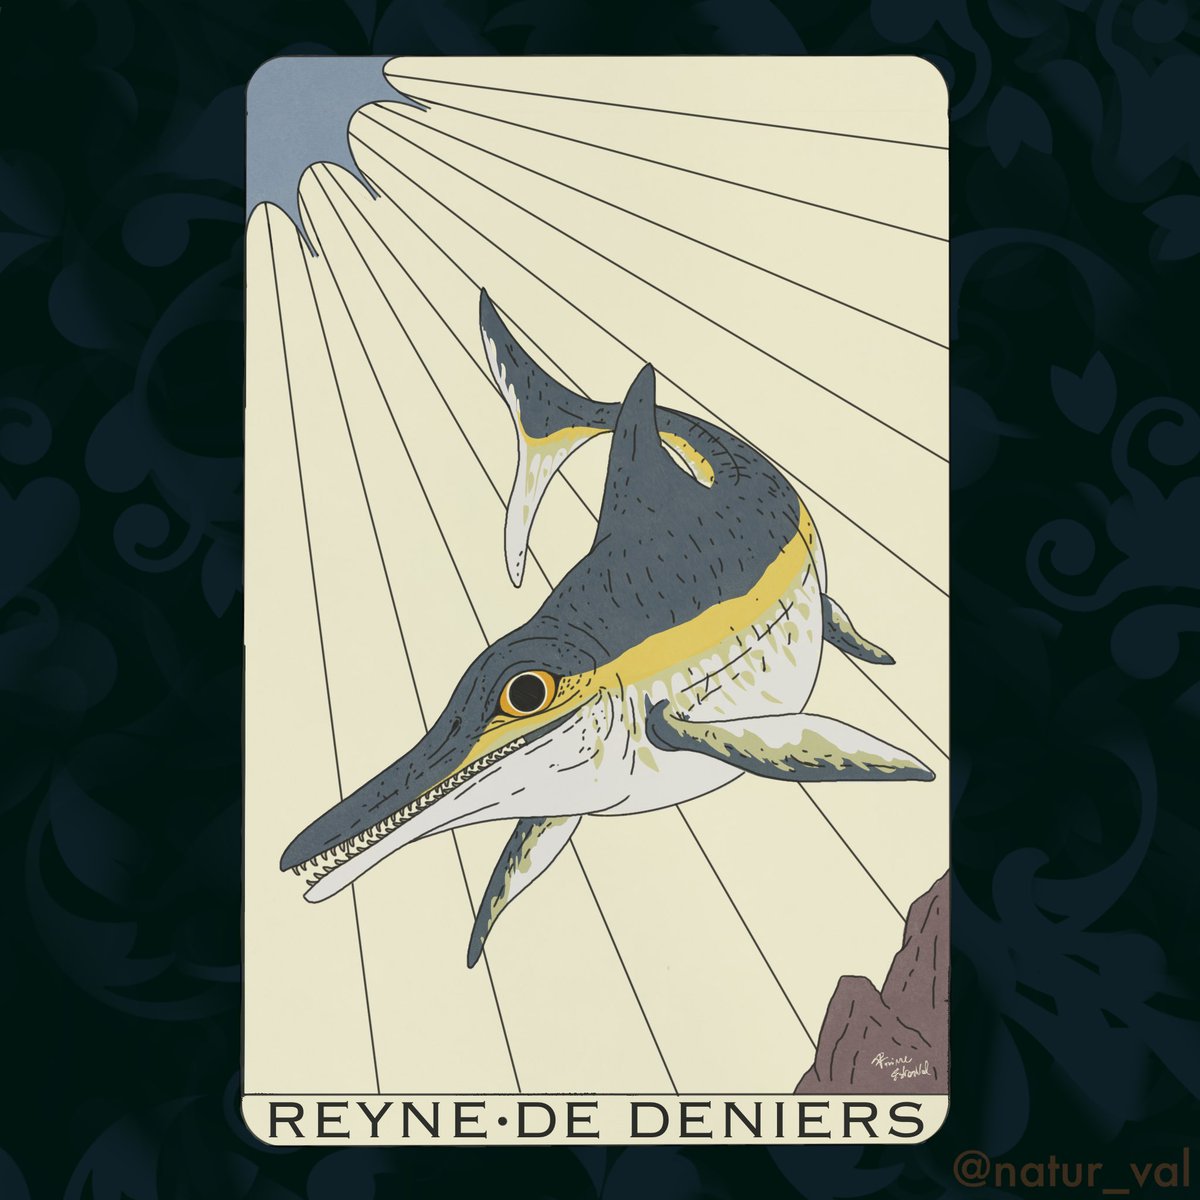 Tarots Before Time - Reyne de Deniers (Queen of Pentacles). Temnodontosaurus trigonodon, an ichthyosaur, a large marine reptile that lived during the Jurassic. The yellow band is a reference to the richness of the suit of pentacles and represents, in fact, the color of gold.